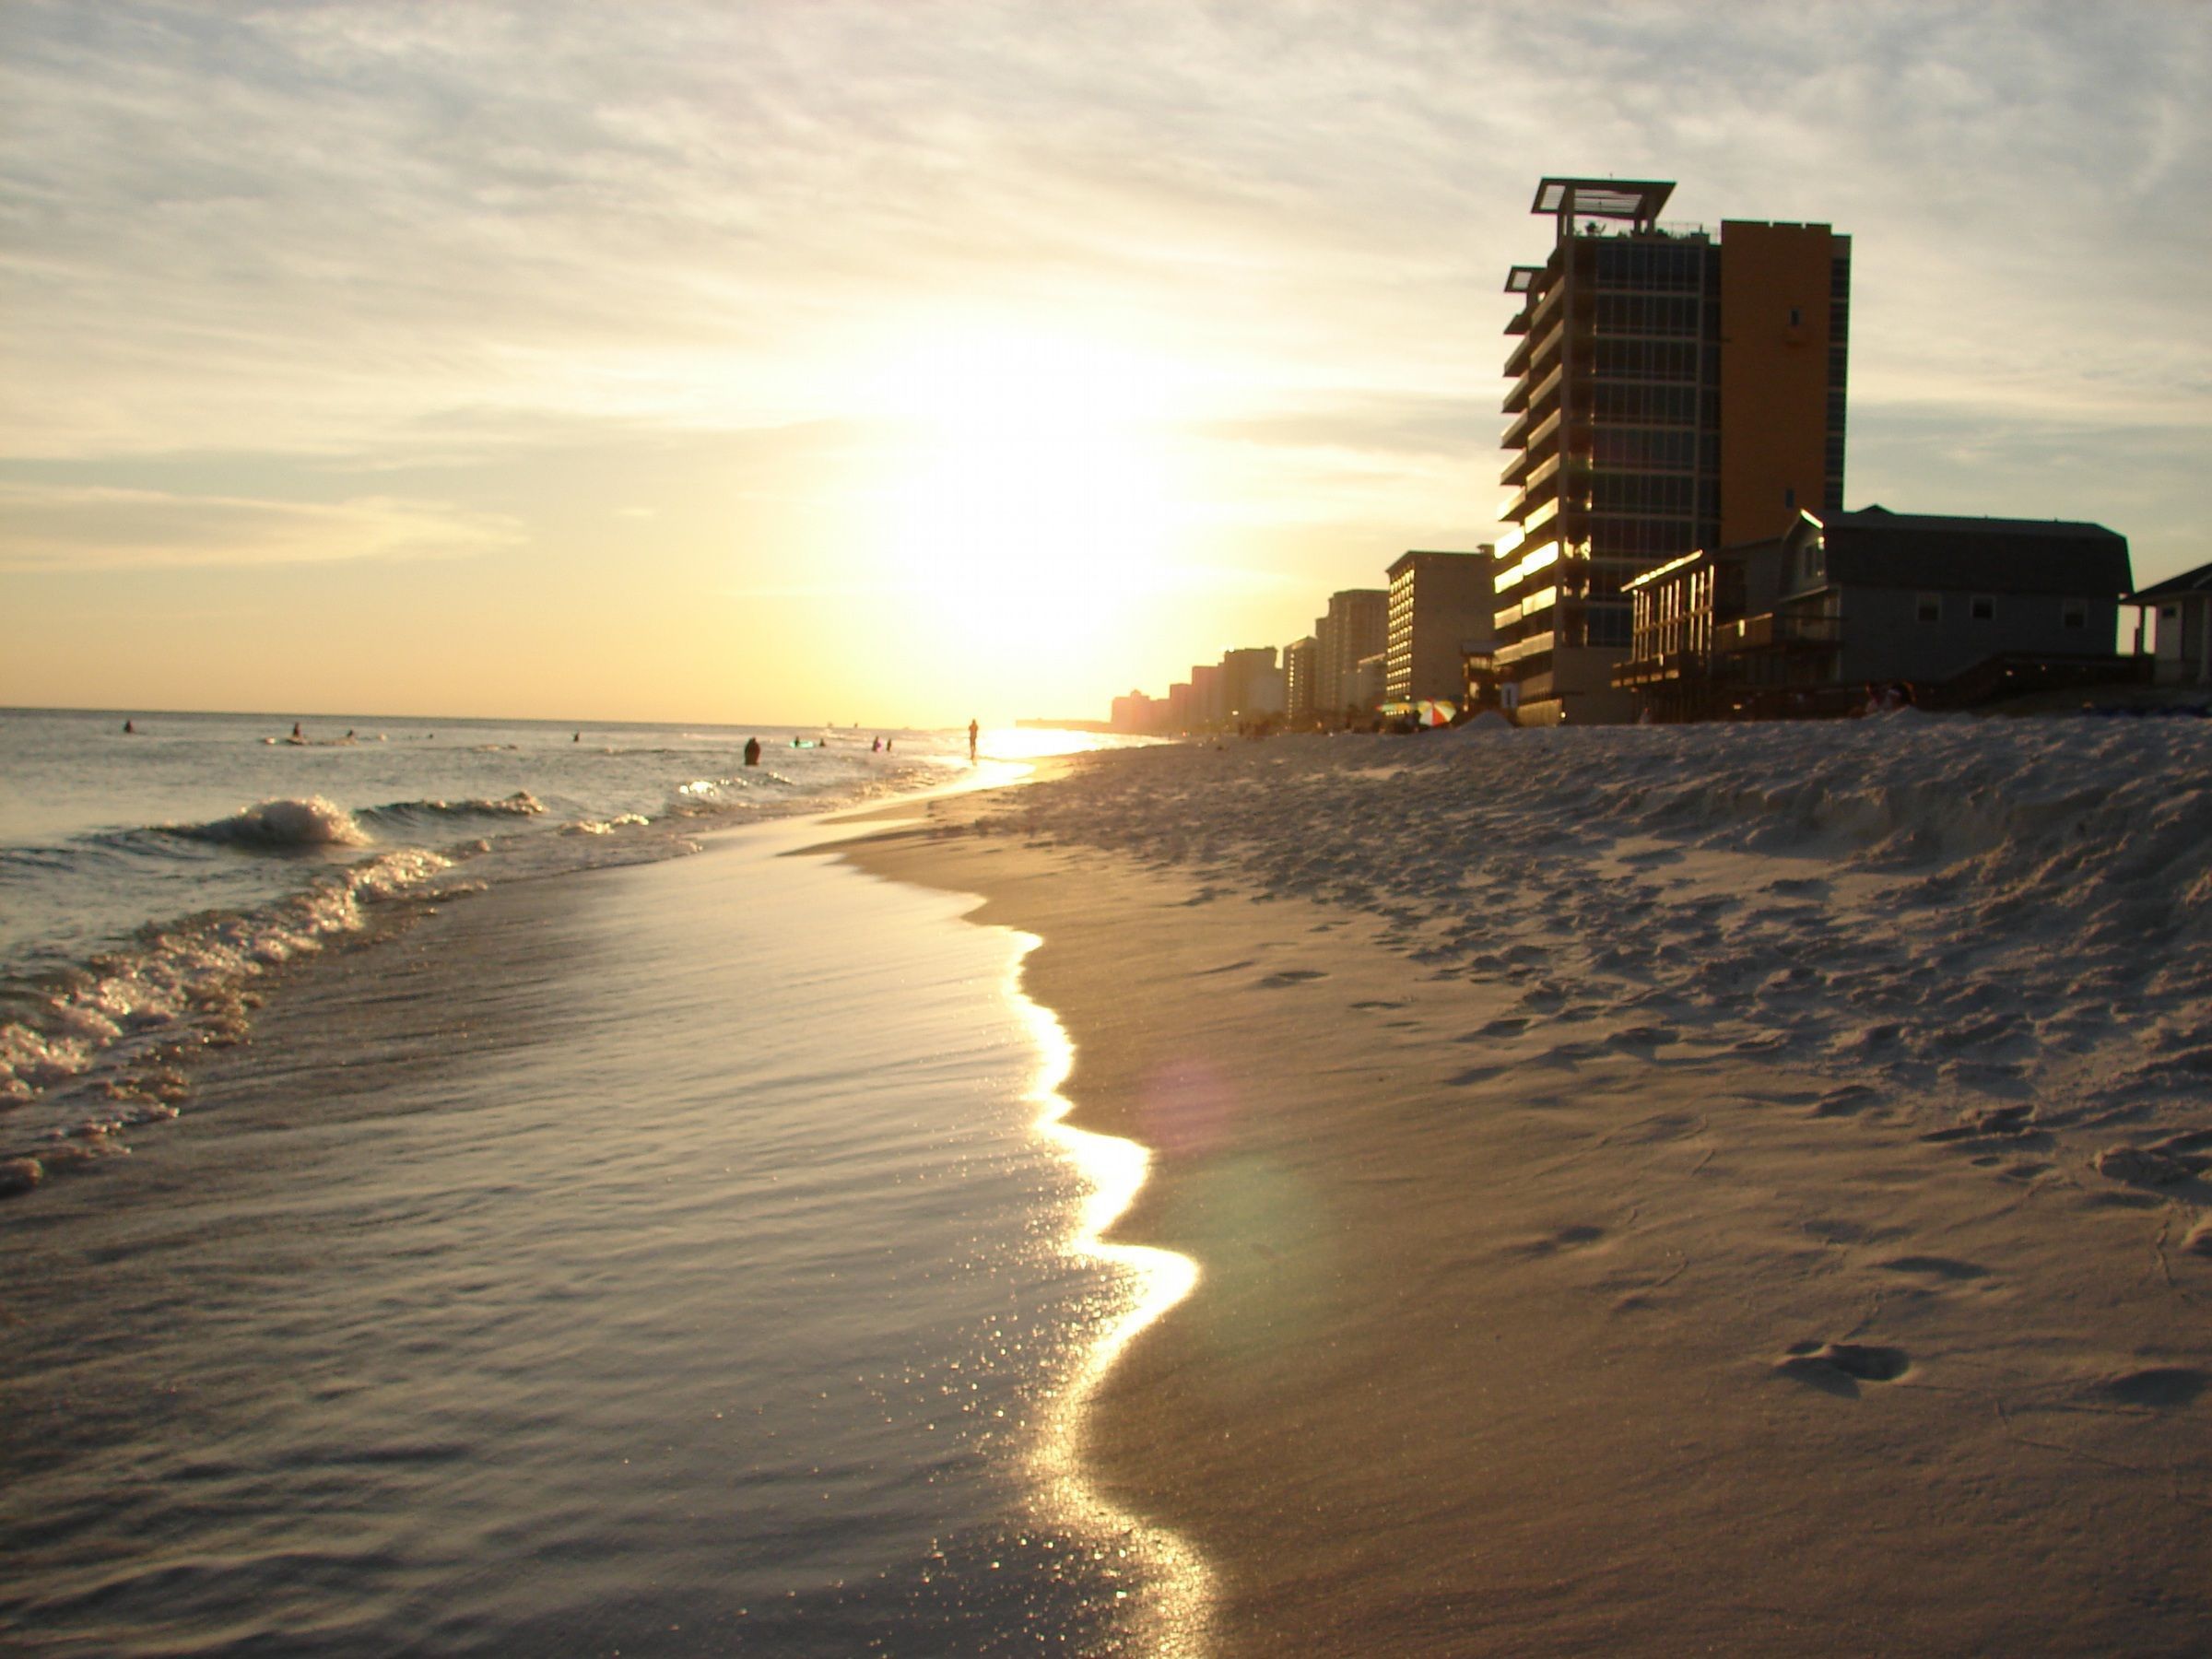 The shoreline of the Gulf of Mexico in Panama City Beach, Florida.